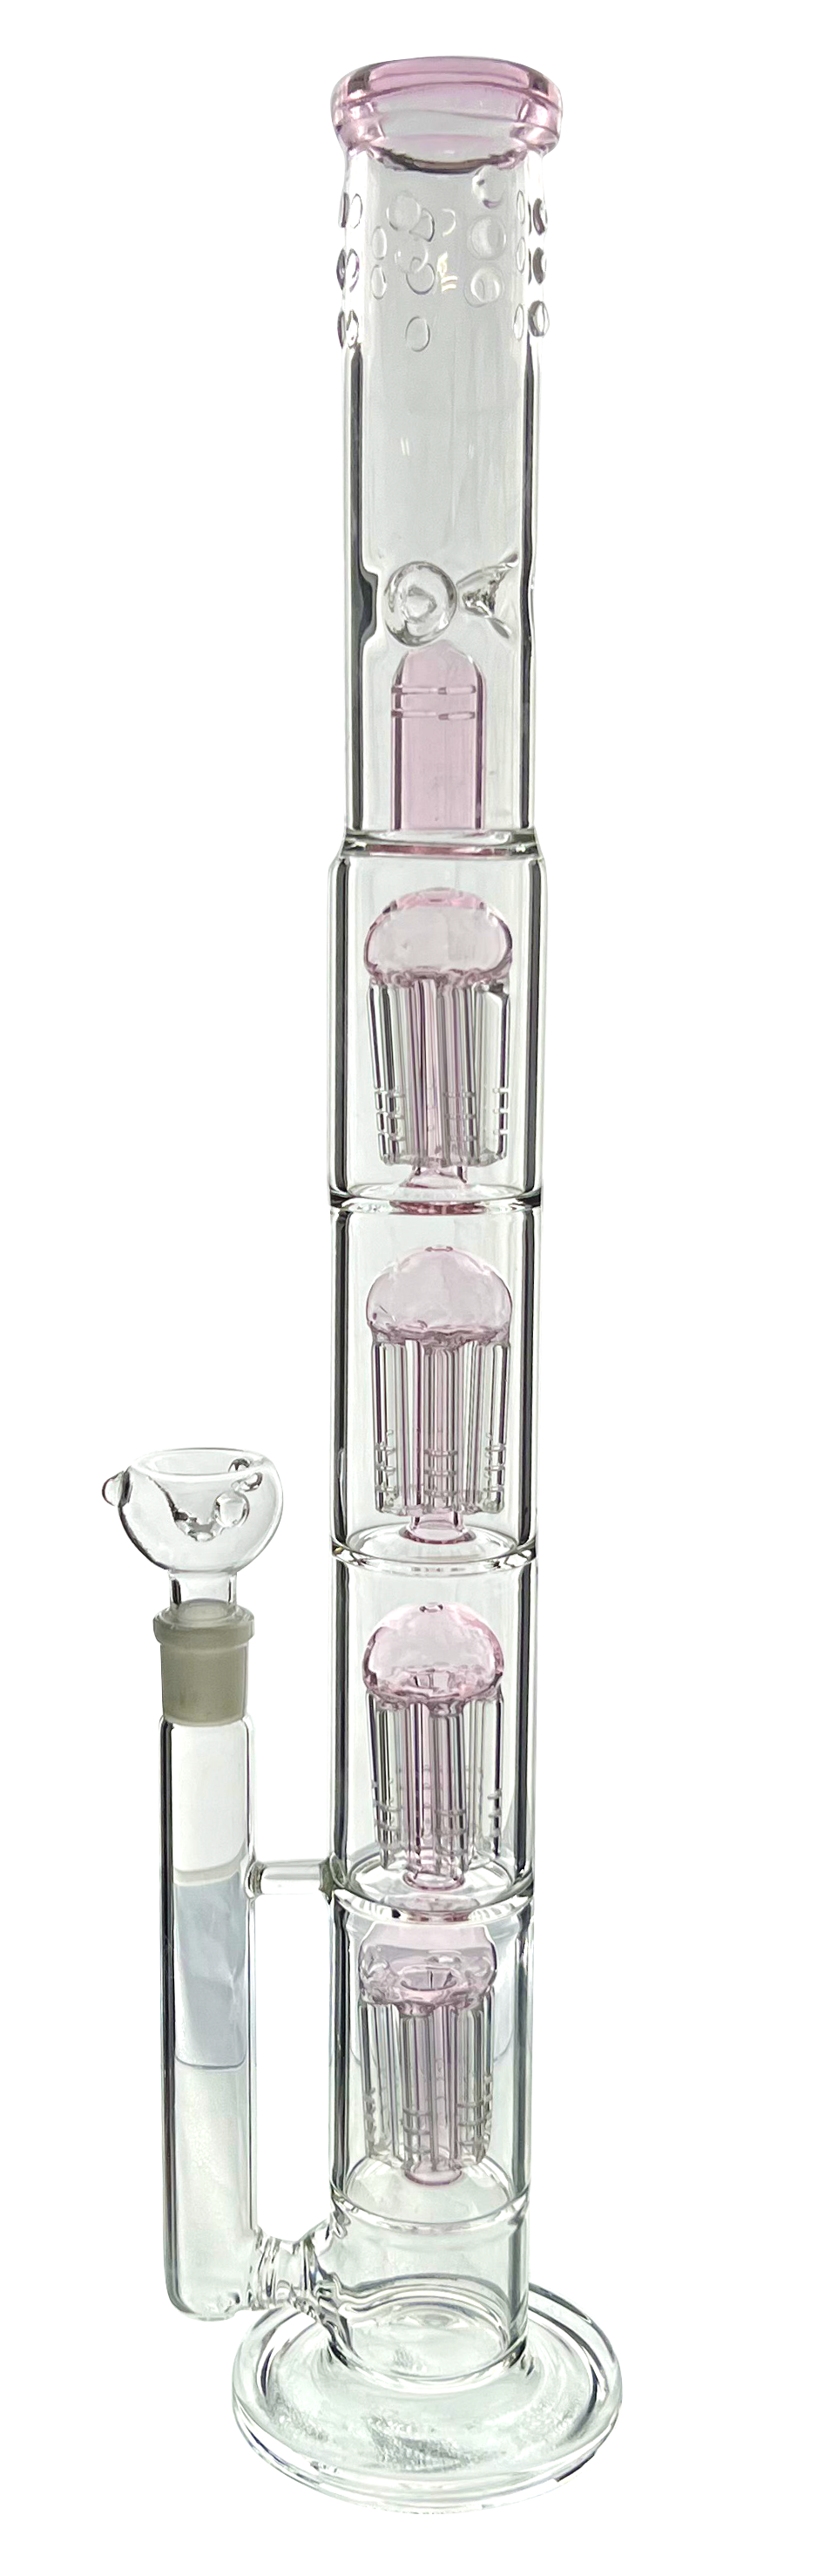 STRAIGHT TUBE WITH 4 TIER TREE PERC WITH FLASHGUARD - Limitless Puff